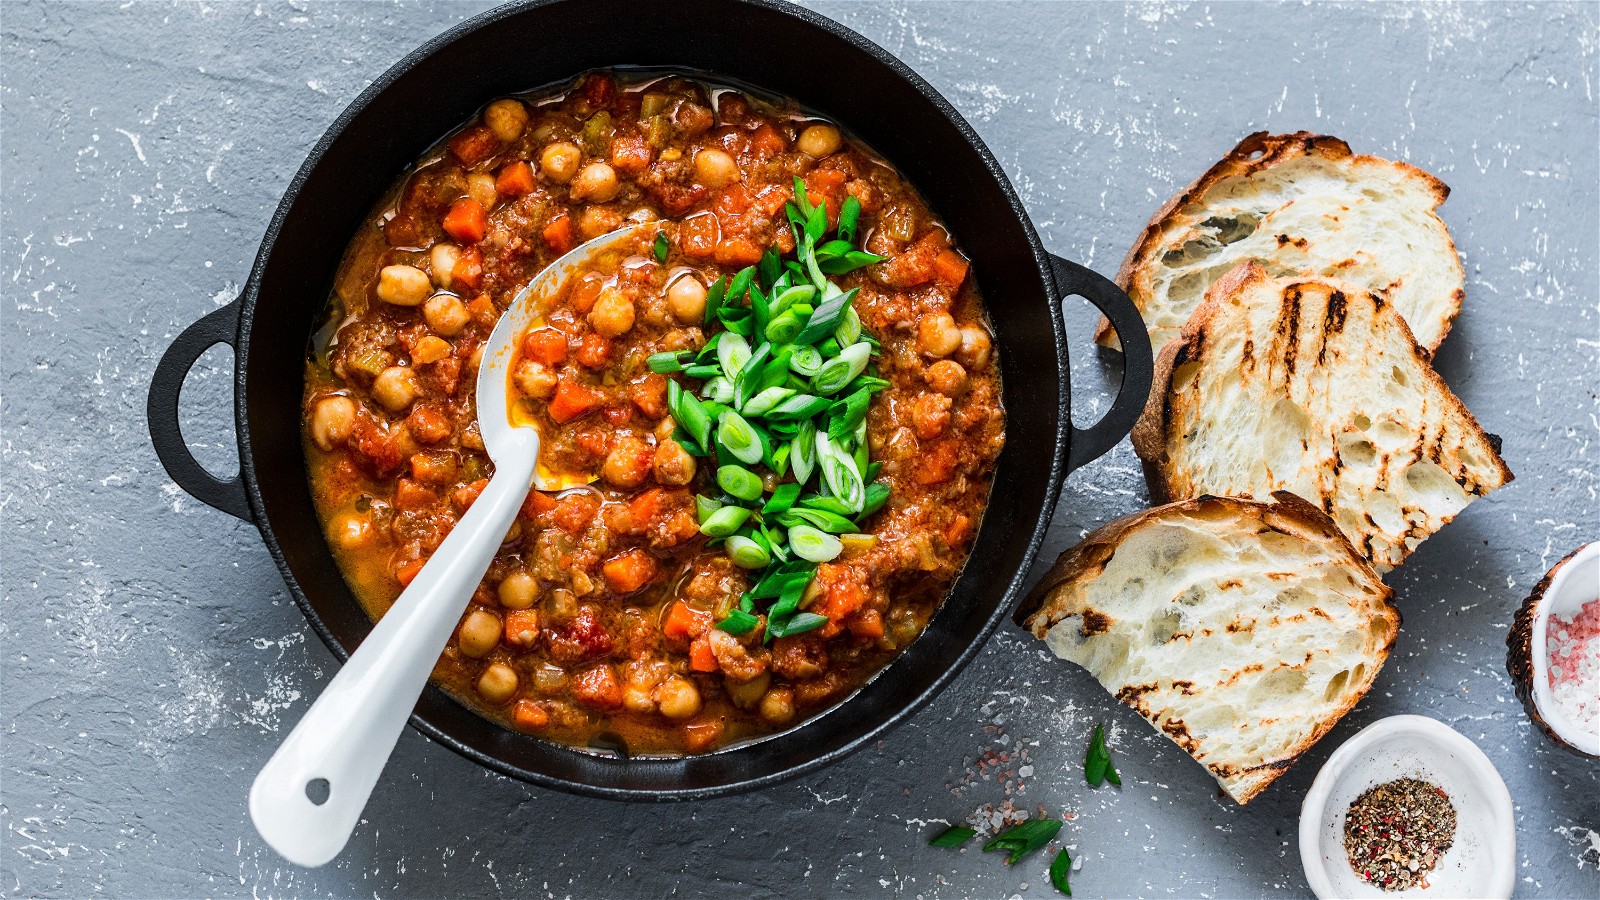 Image of Spiced Chickpeas & Sweet Potato Stew